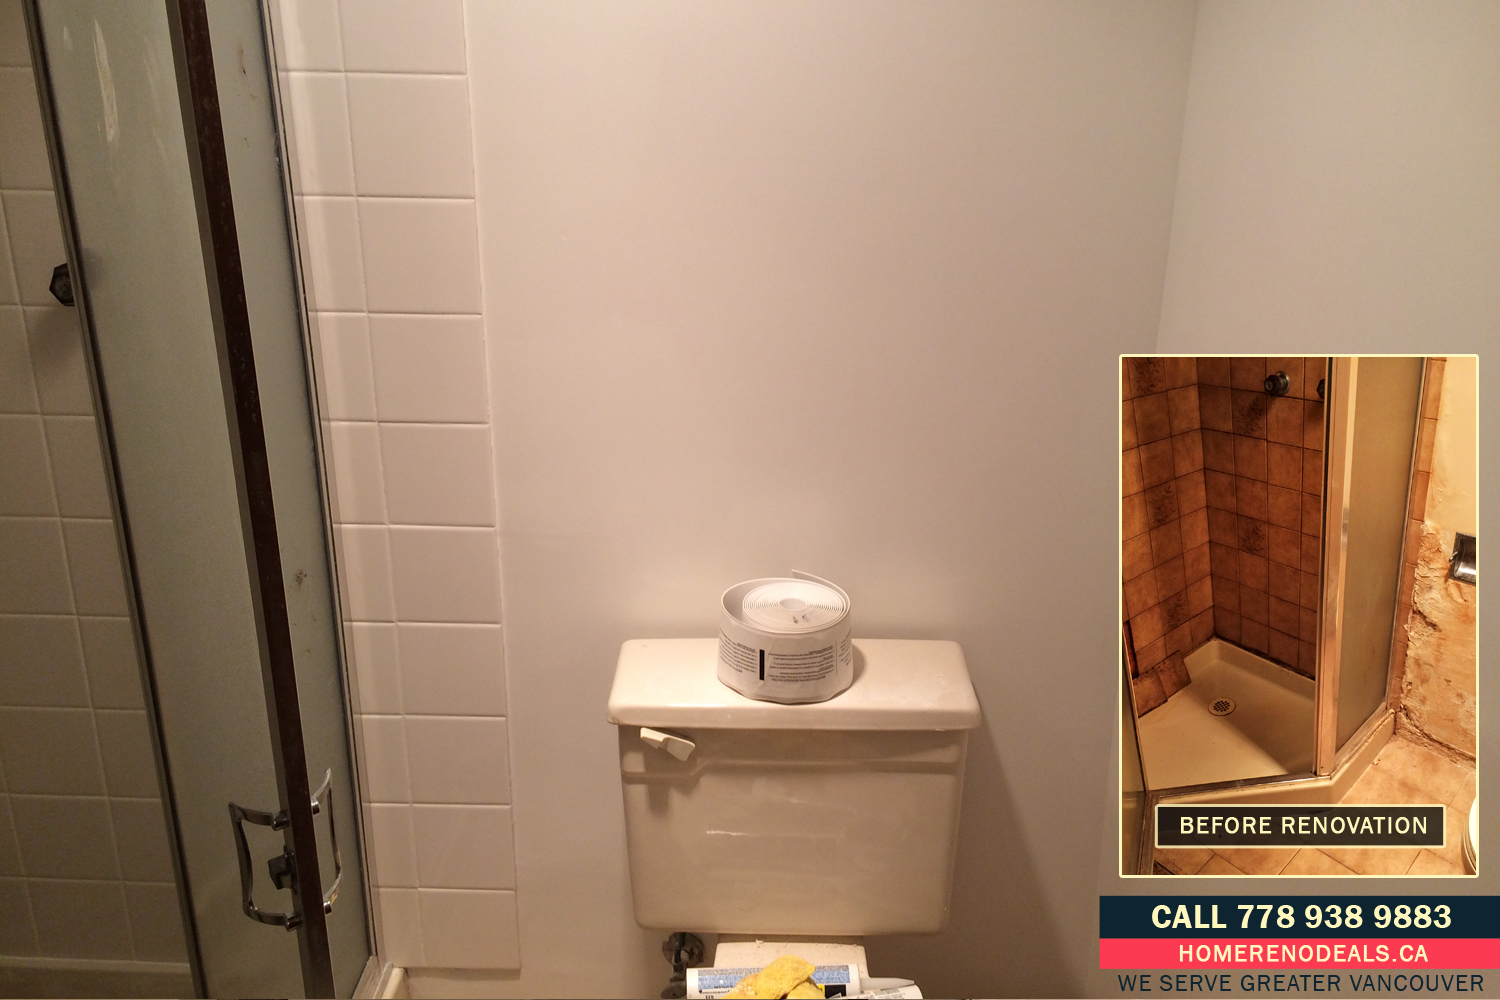 Bathroom walls have been repaired and painted